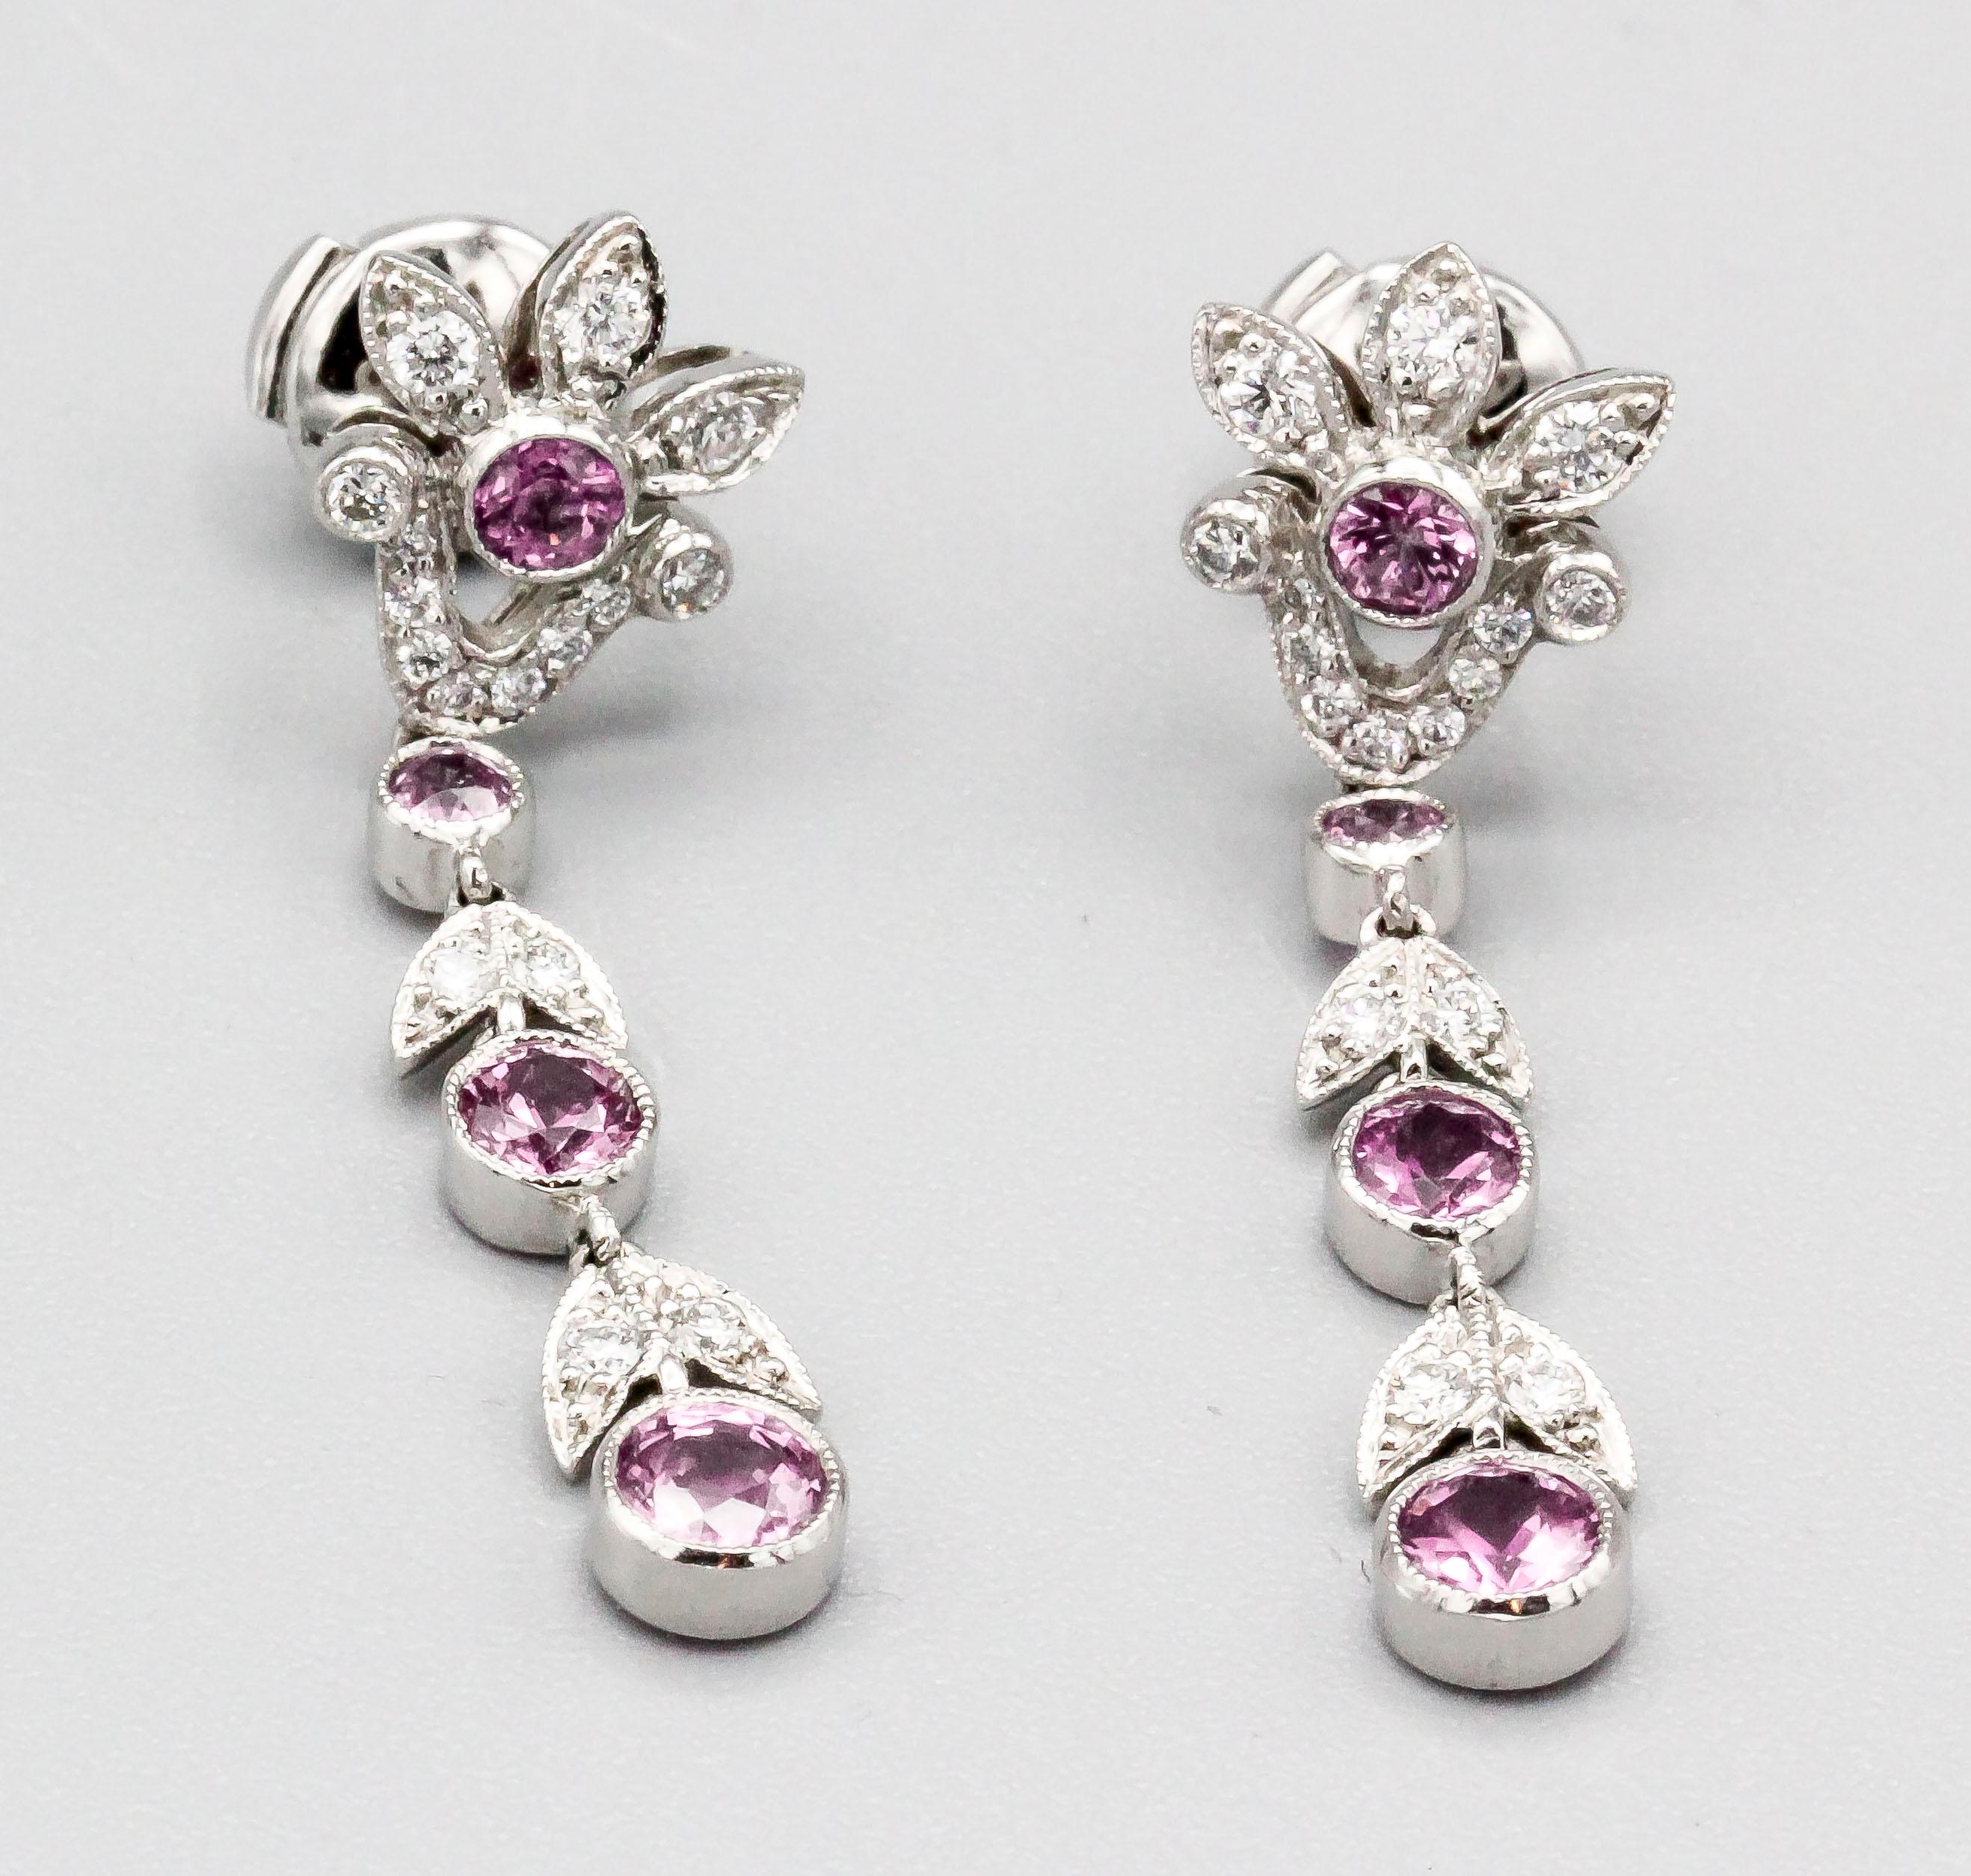 Fine pair of diamond, pink sapphire and platinum ear pendants by Tiffany & Co. The earrings feature a foliage design with approx. 1.5 carats of pink sapphires and .75 carats of round white diamonds.  With original box.

Hallmarks: T & Co., PT950.